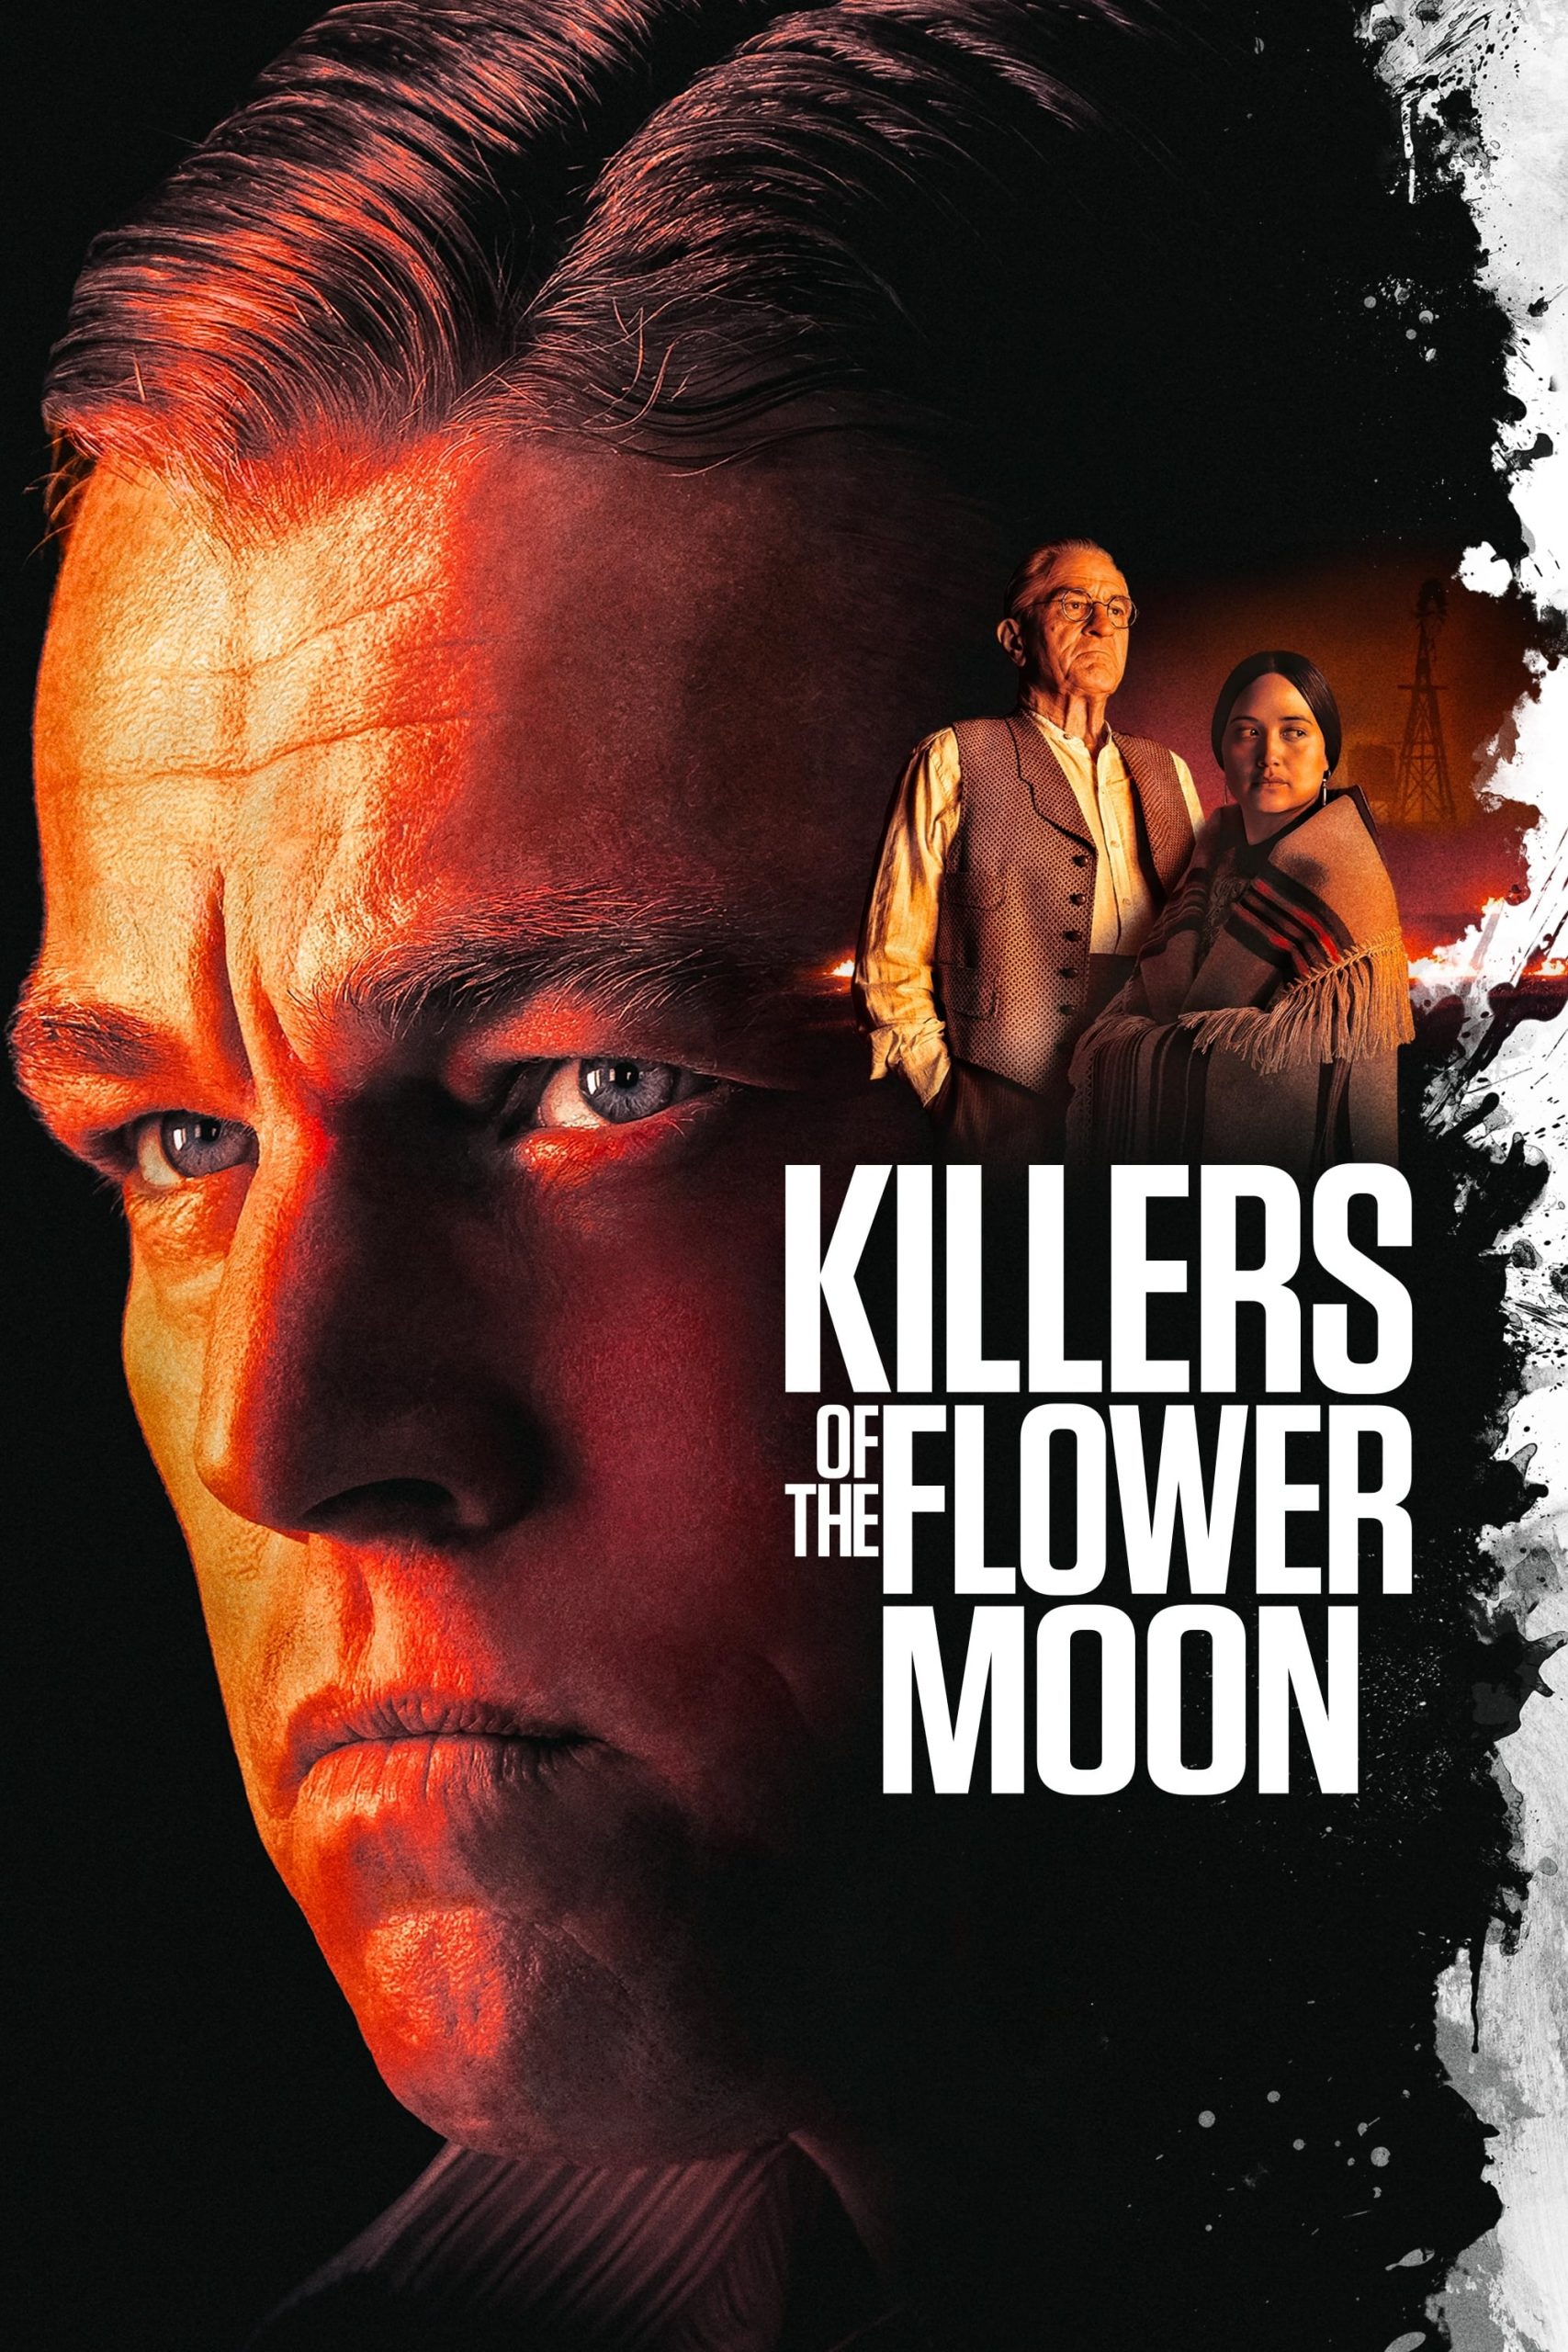 'Killers of the Flower Moon' nominated for 10 Oscars, including Best Picture